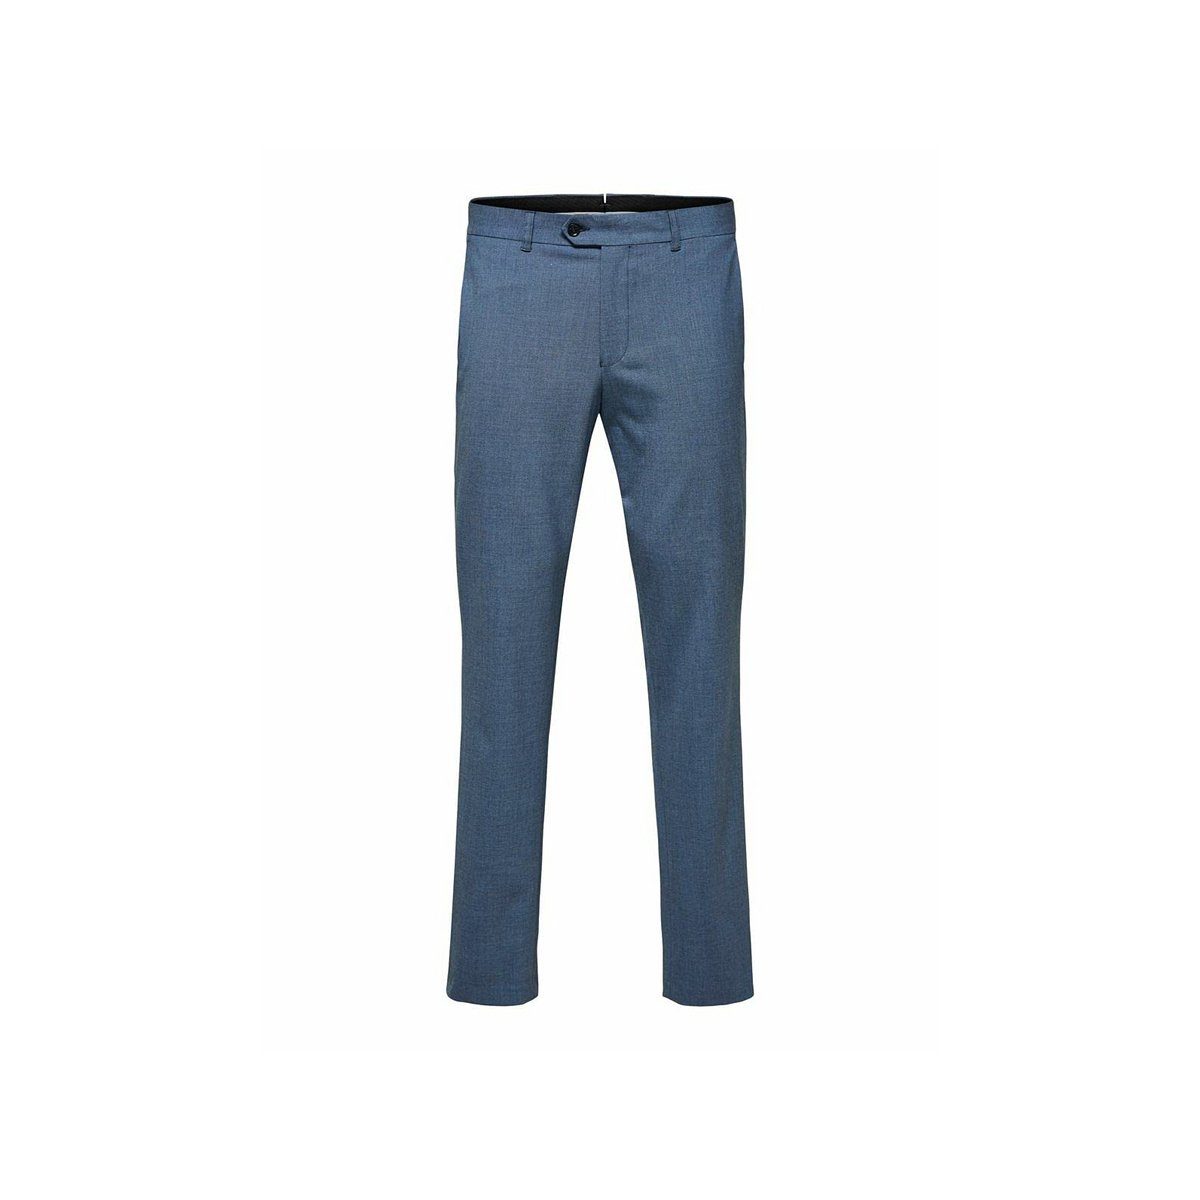 SELECTED HOMME 5-Pocket-Jeans blau (1-tlg) | Straight-Fit Jeans